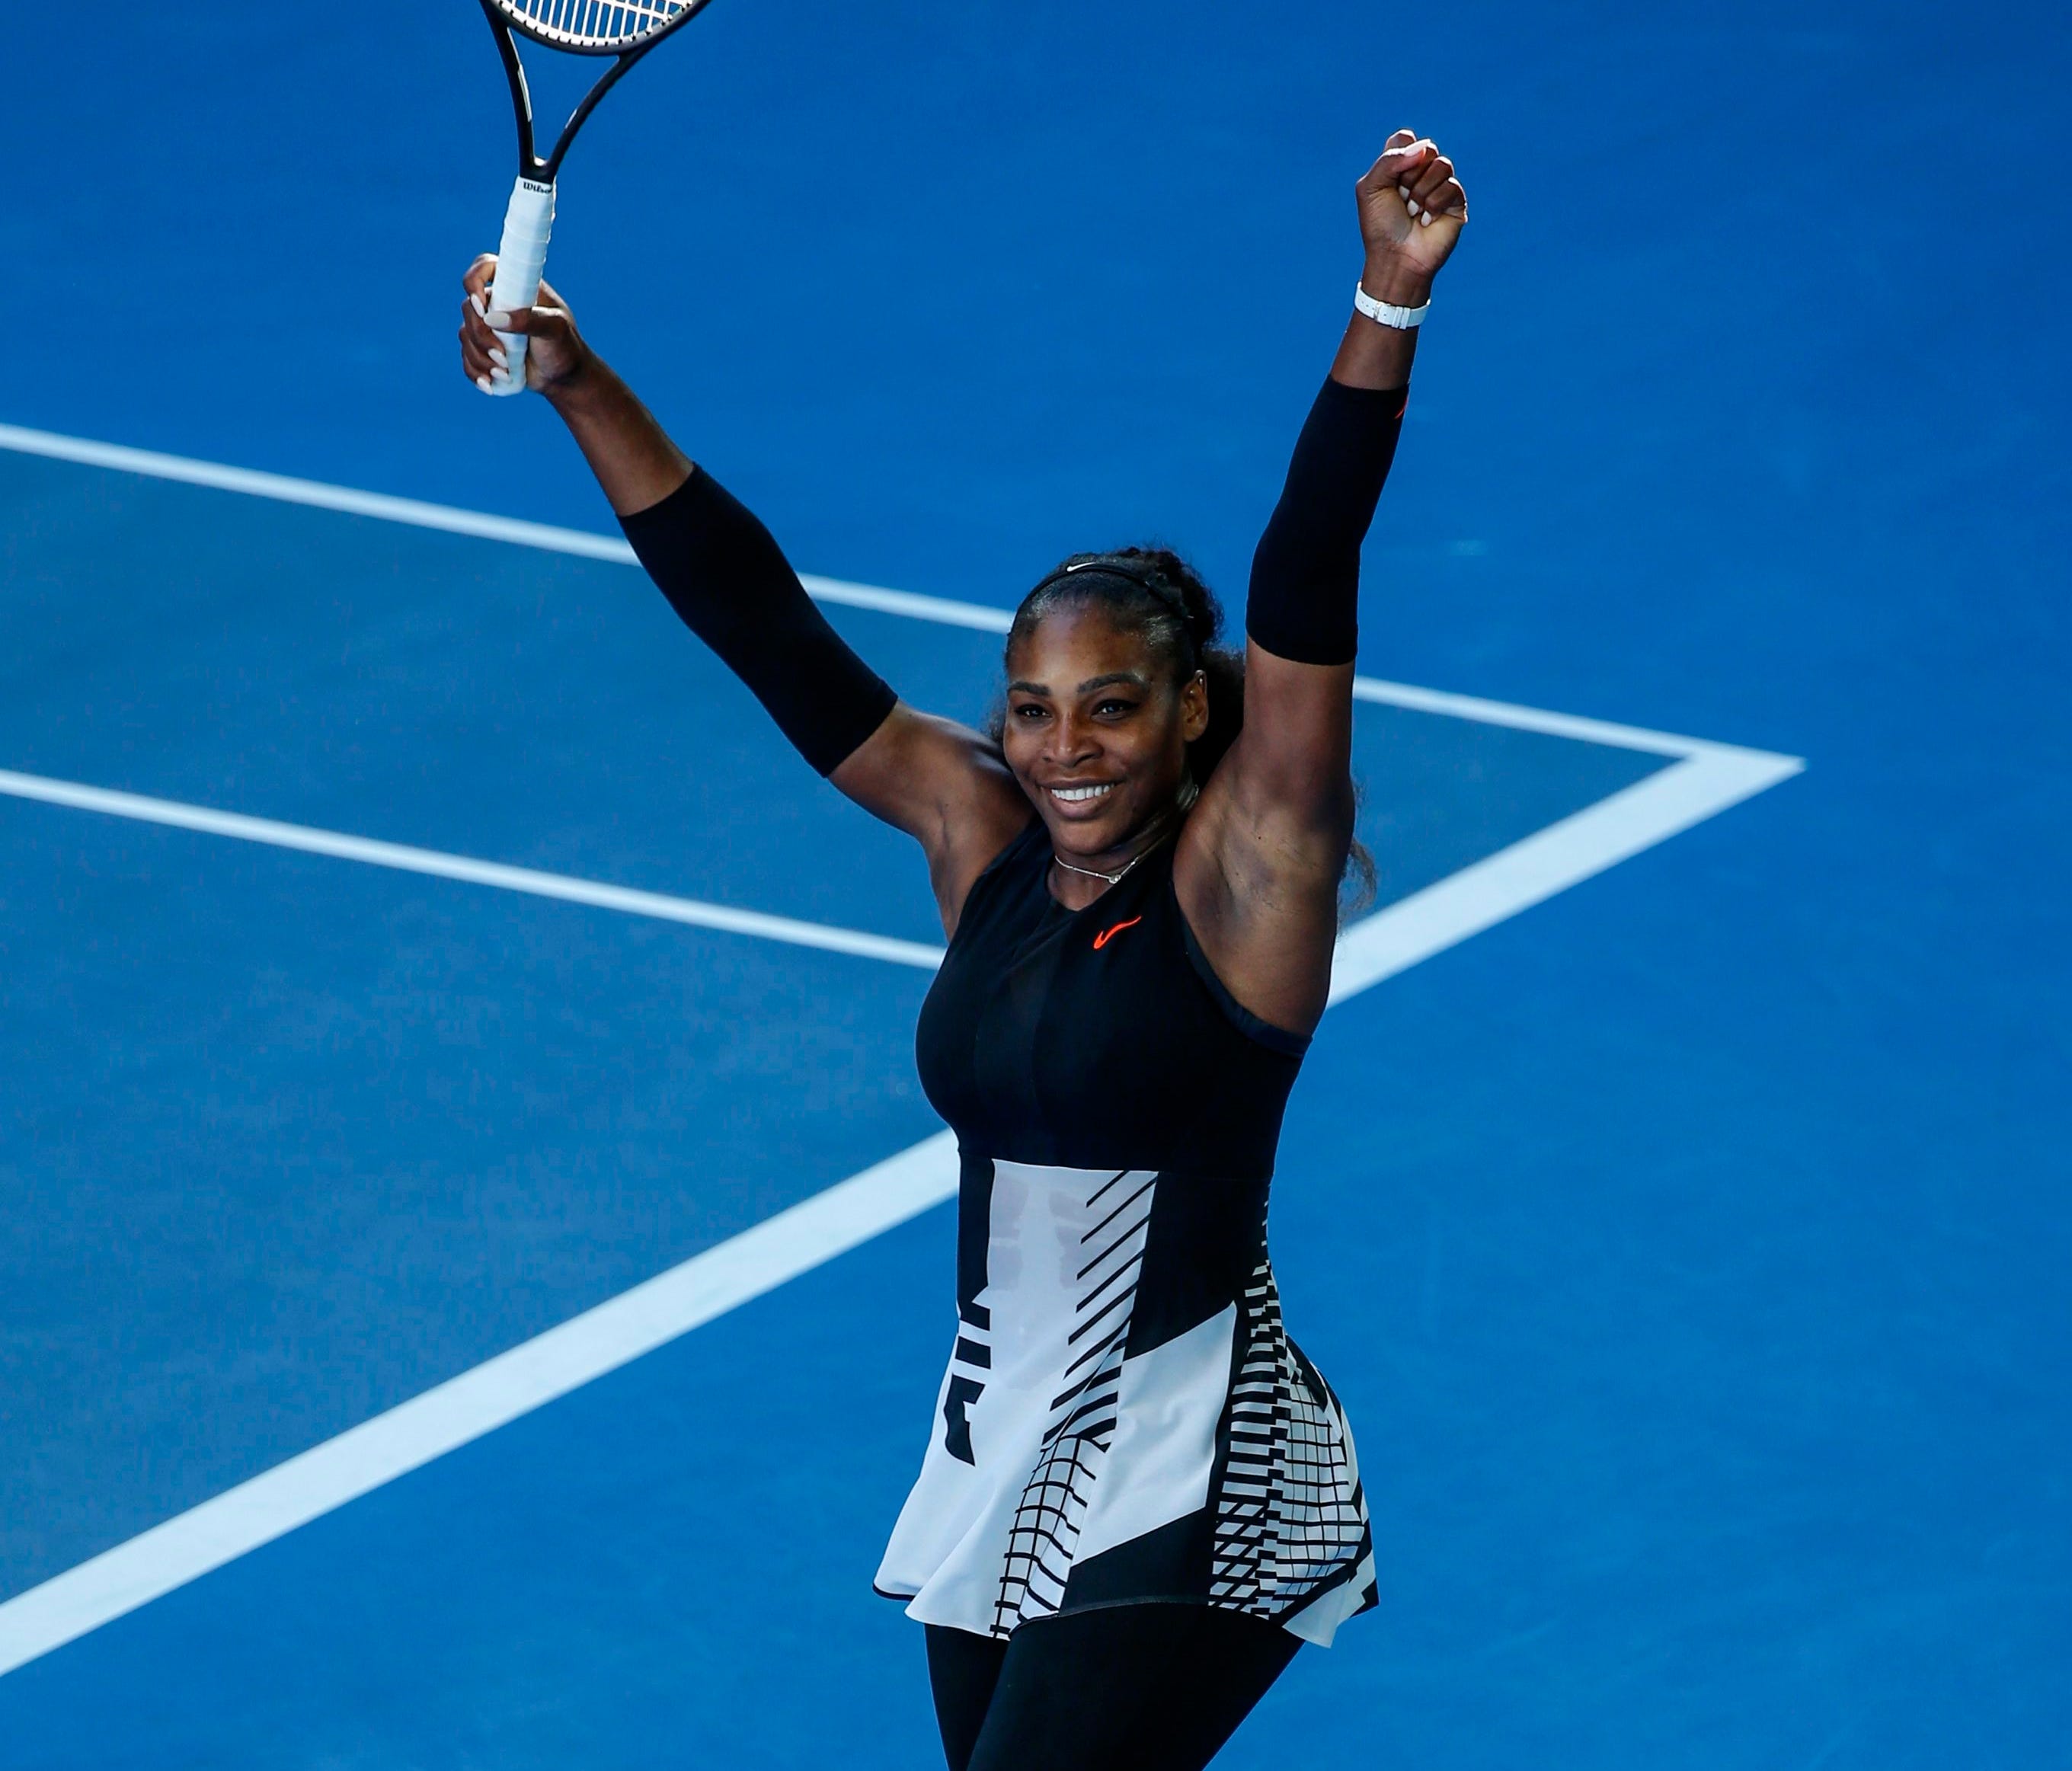 Serena Williams will have to get through her sister to win an Open Era record 23rd Grand Slam title.